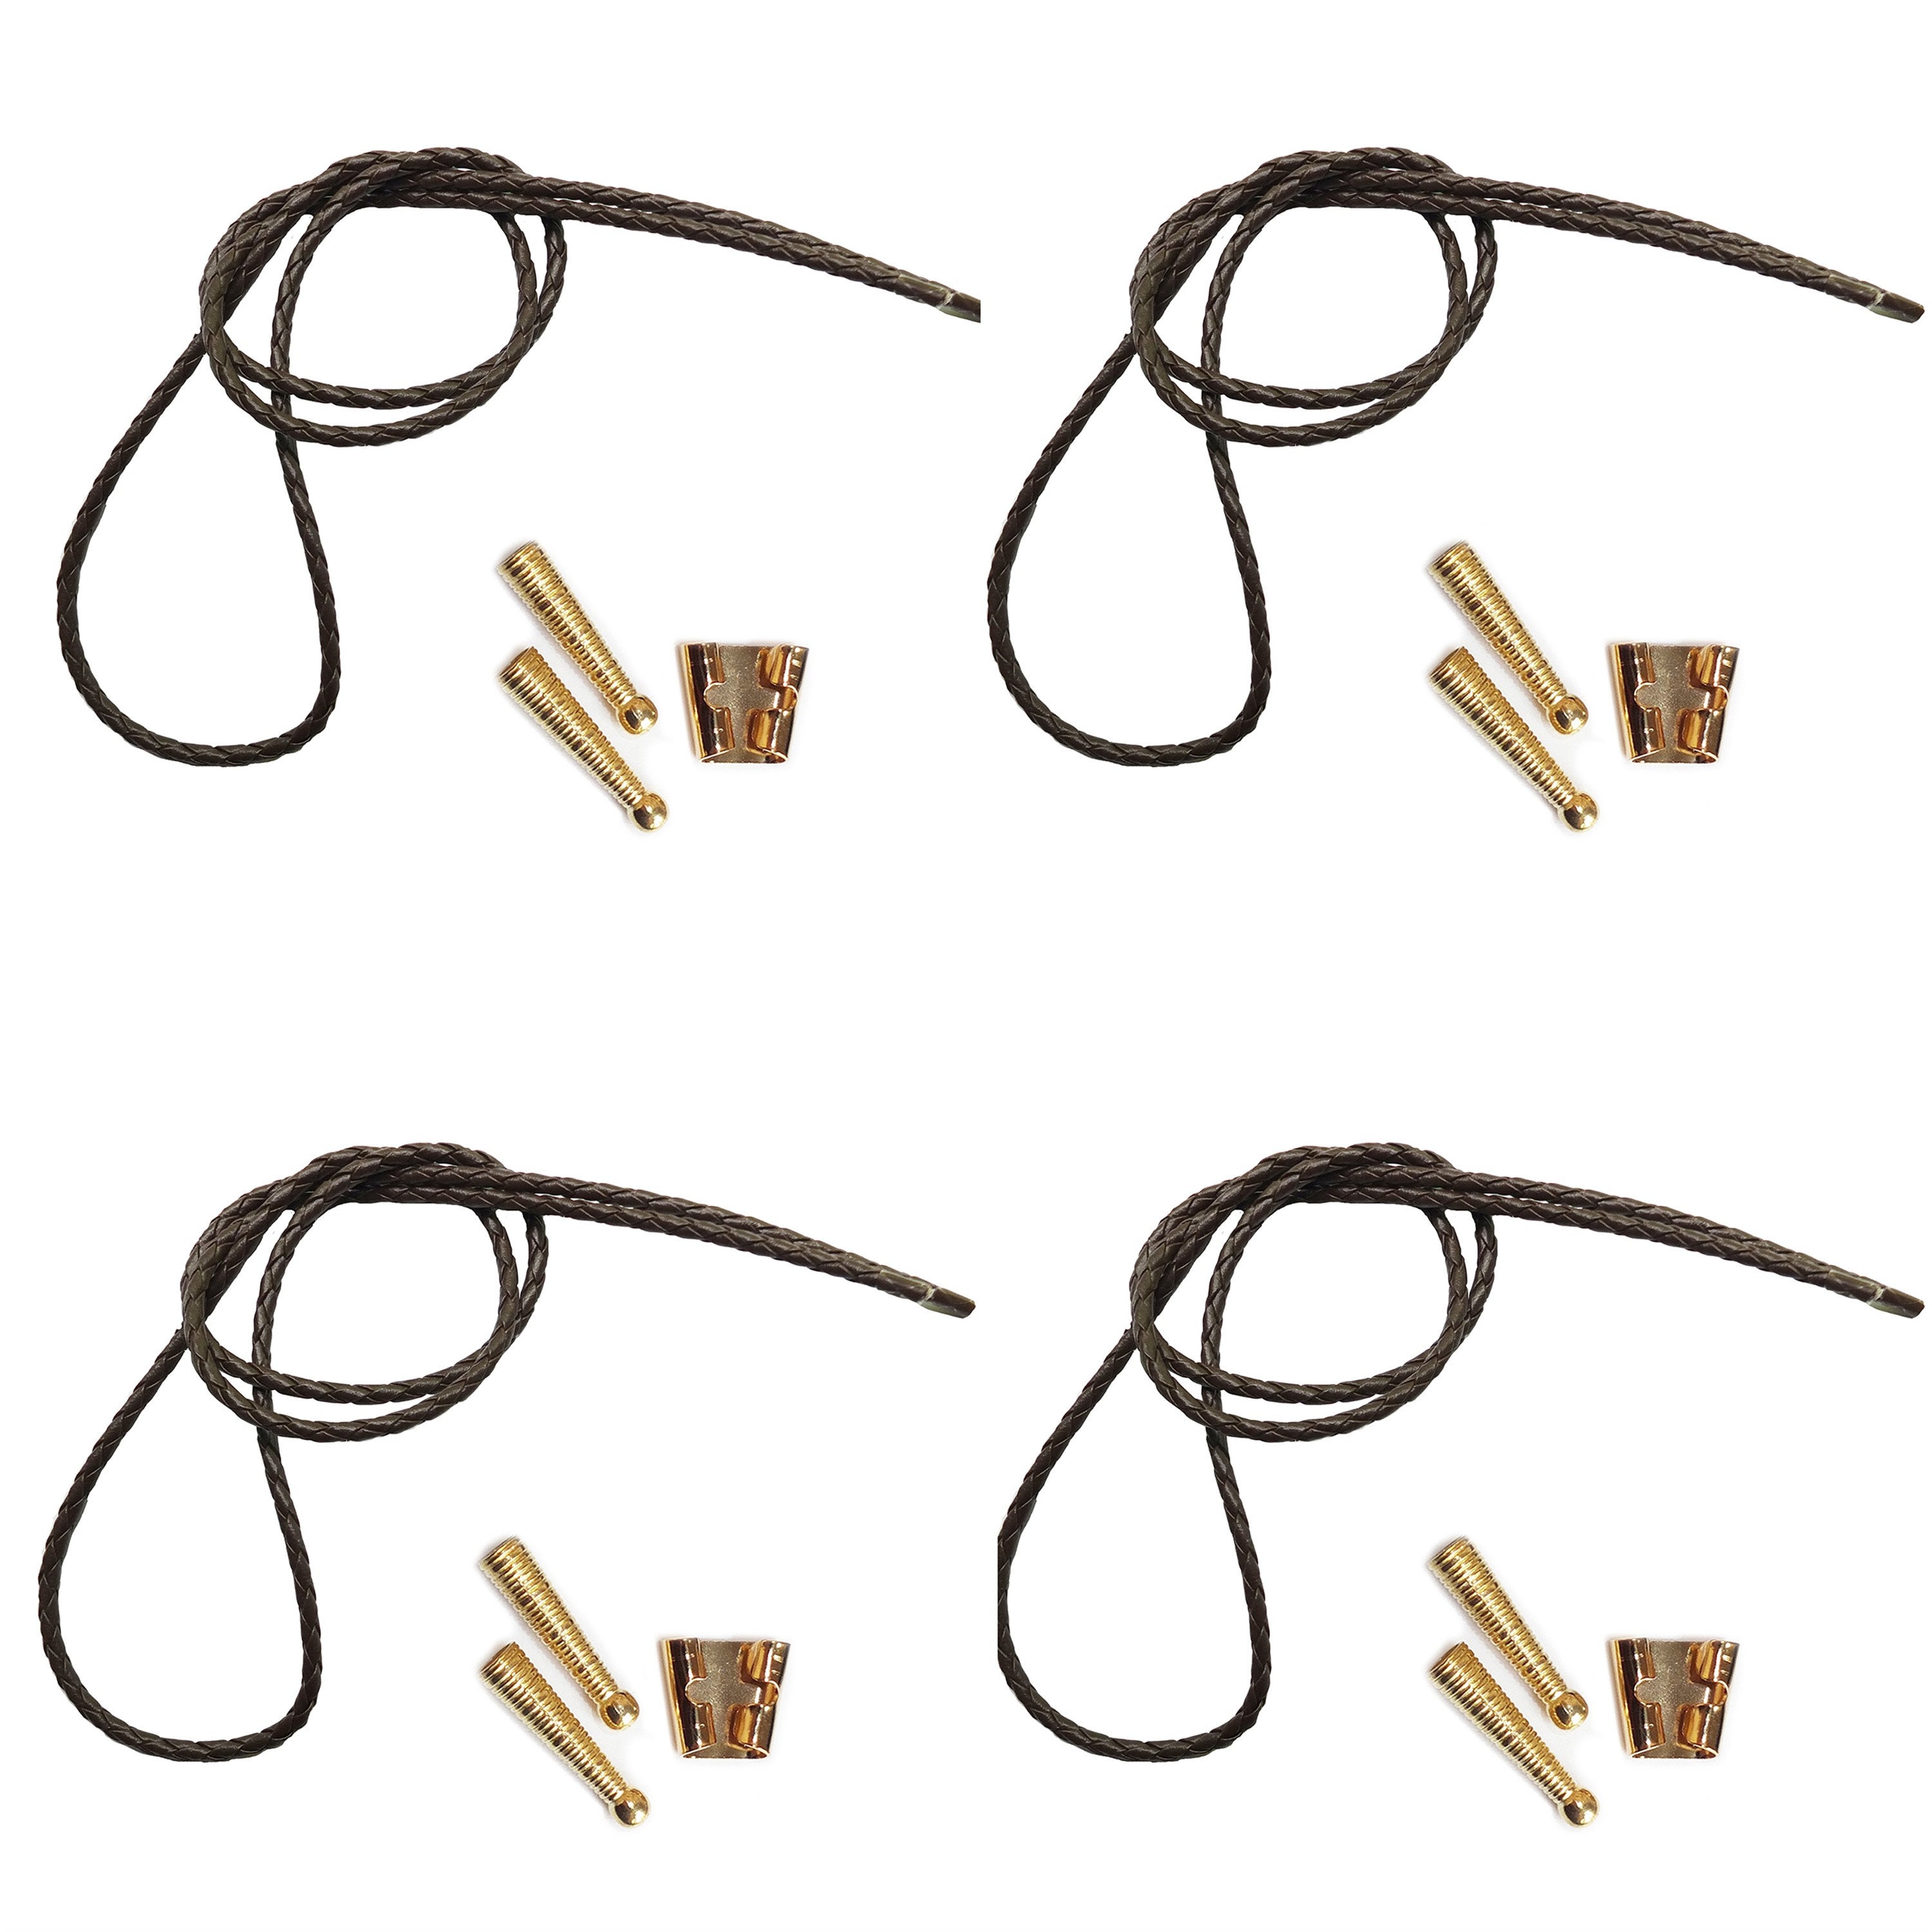 Blank Bolo String Tie Parts Kit Standard Slide Smooth Tips Brown Cord DIY  Gold Tone Supplies for 4 T